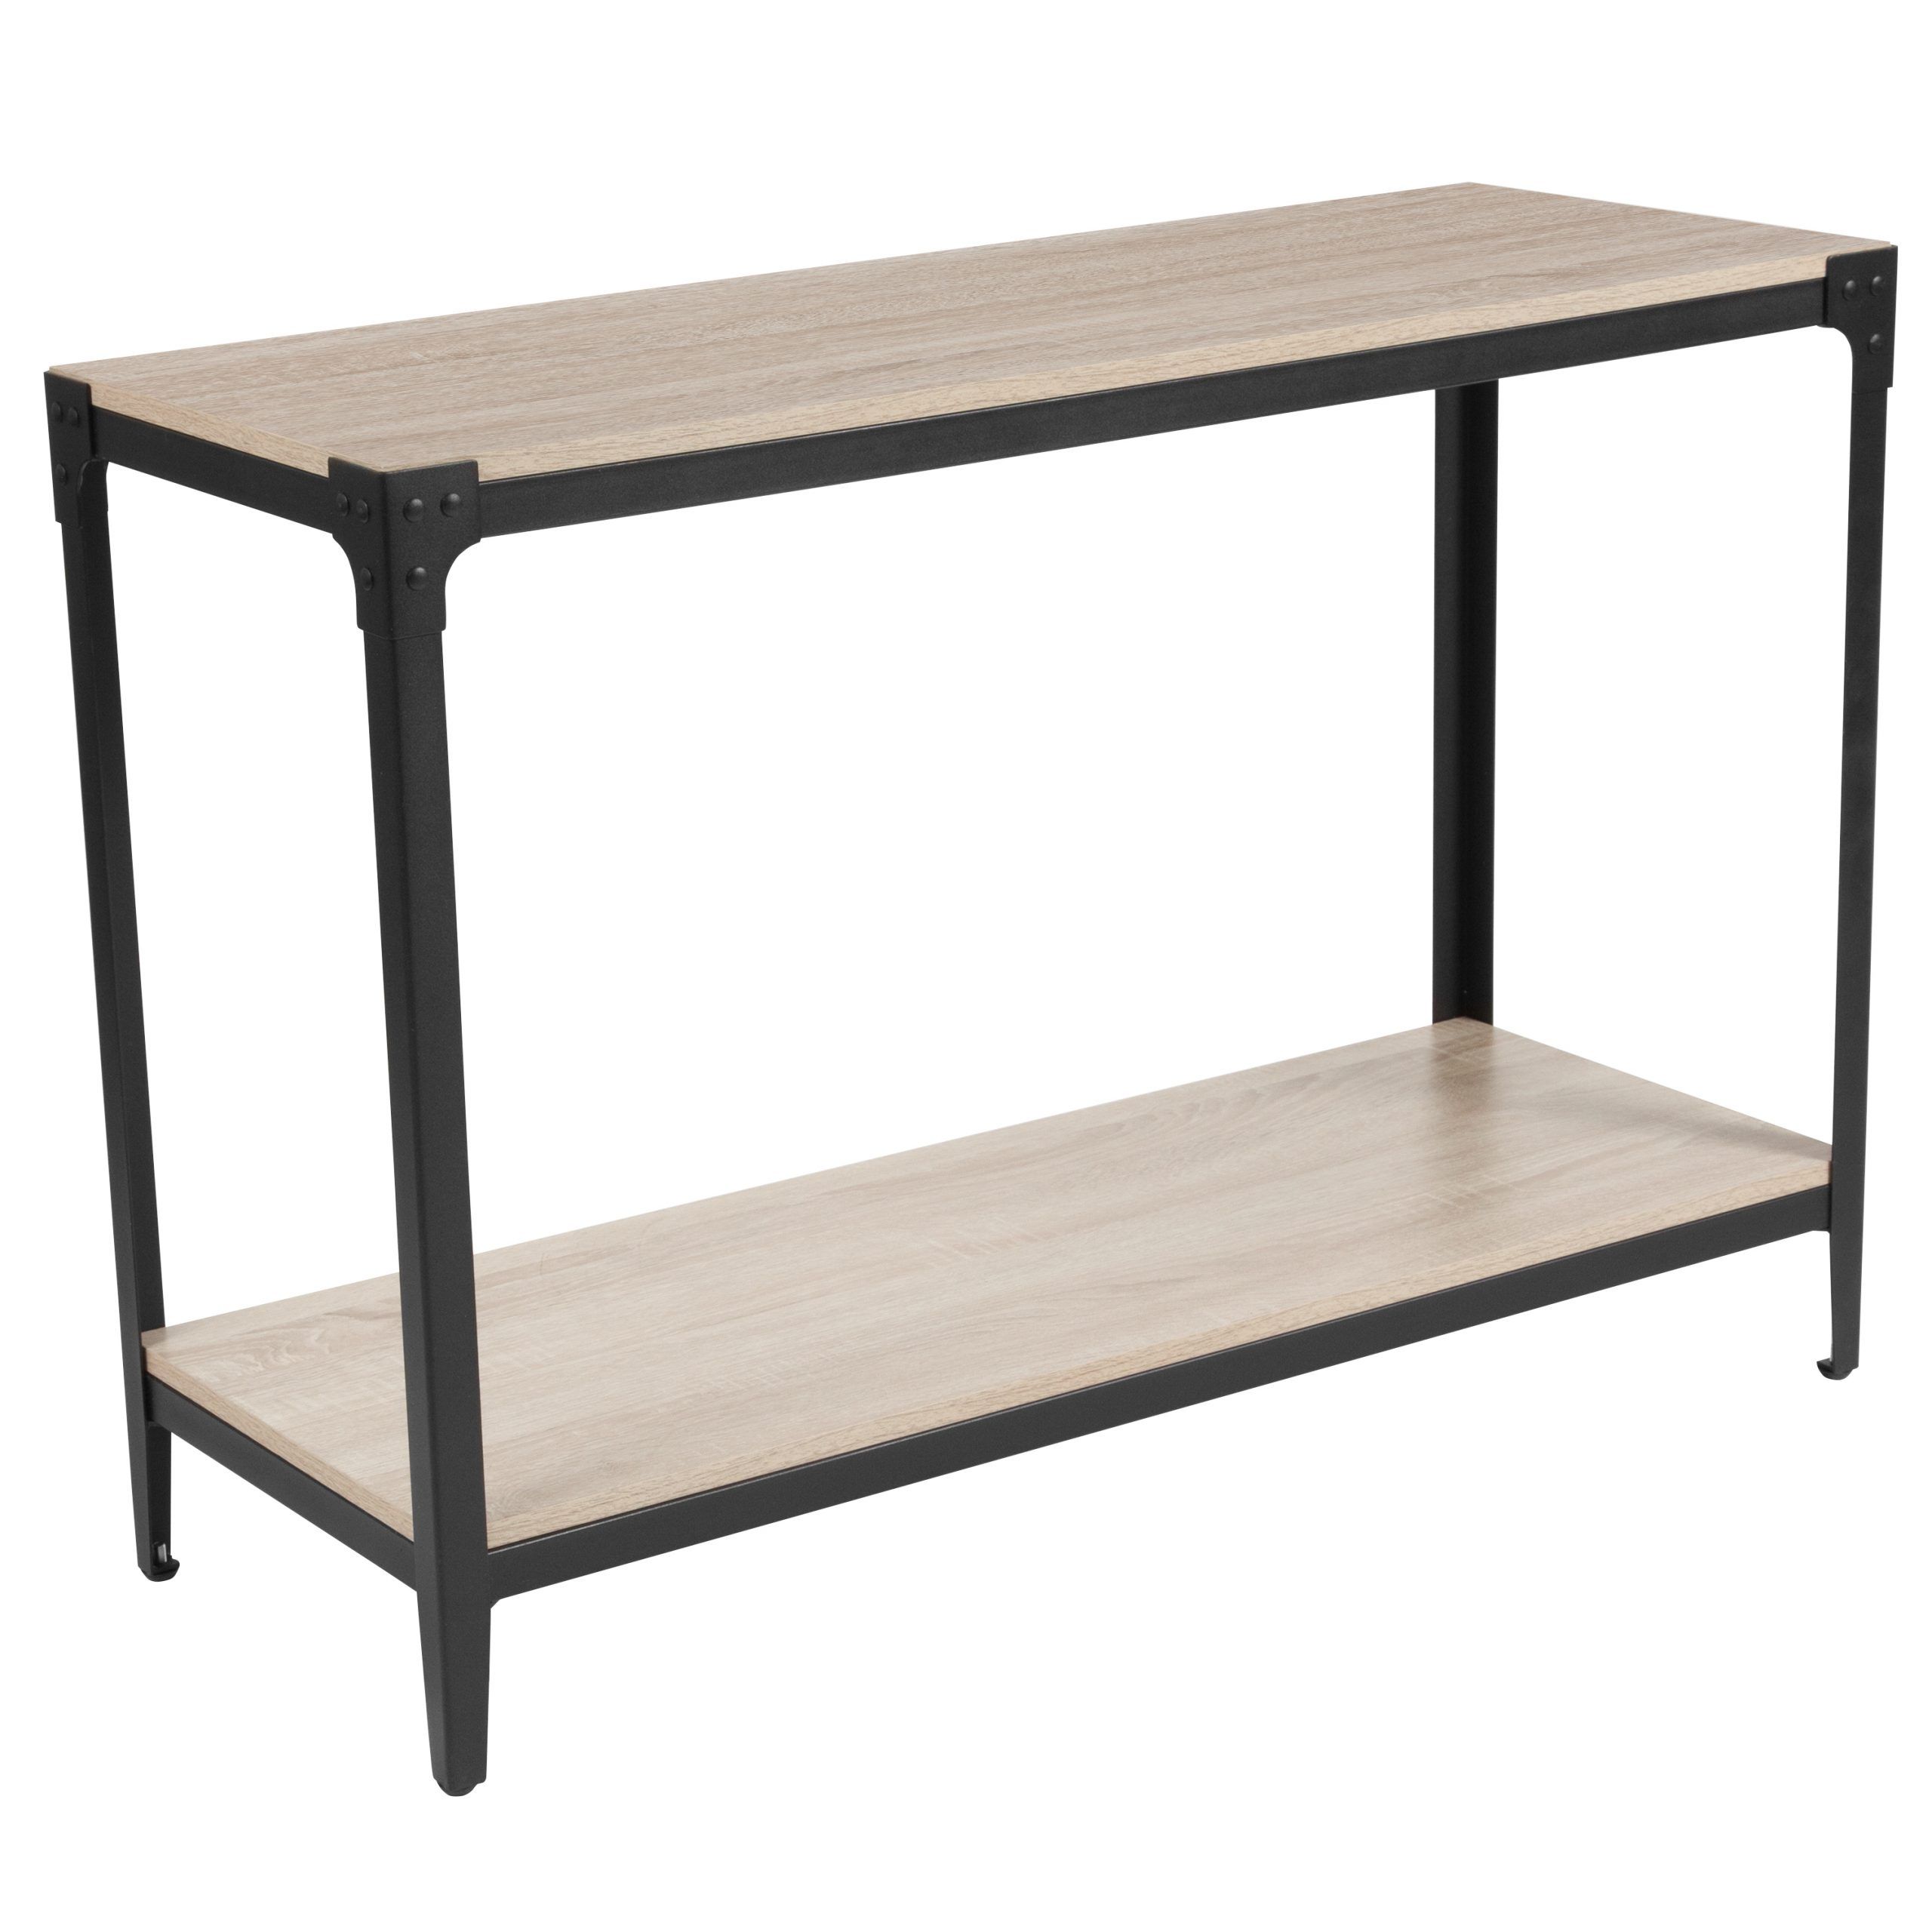 Northvale Collection Console Table With Metal Legs – Walmart Regarding Metal Console Tables (View 19 of 20)